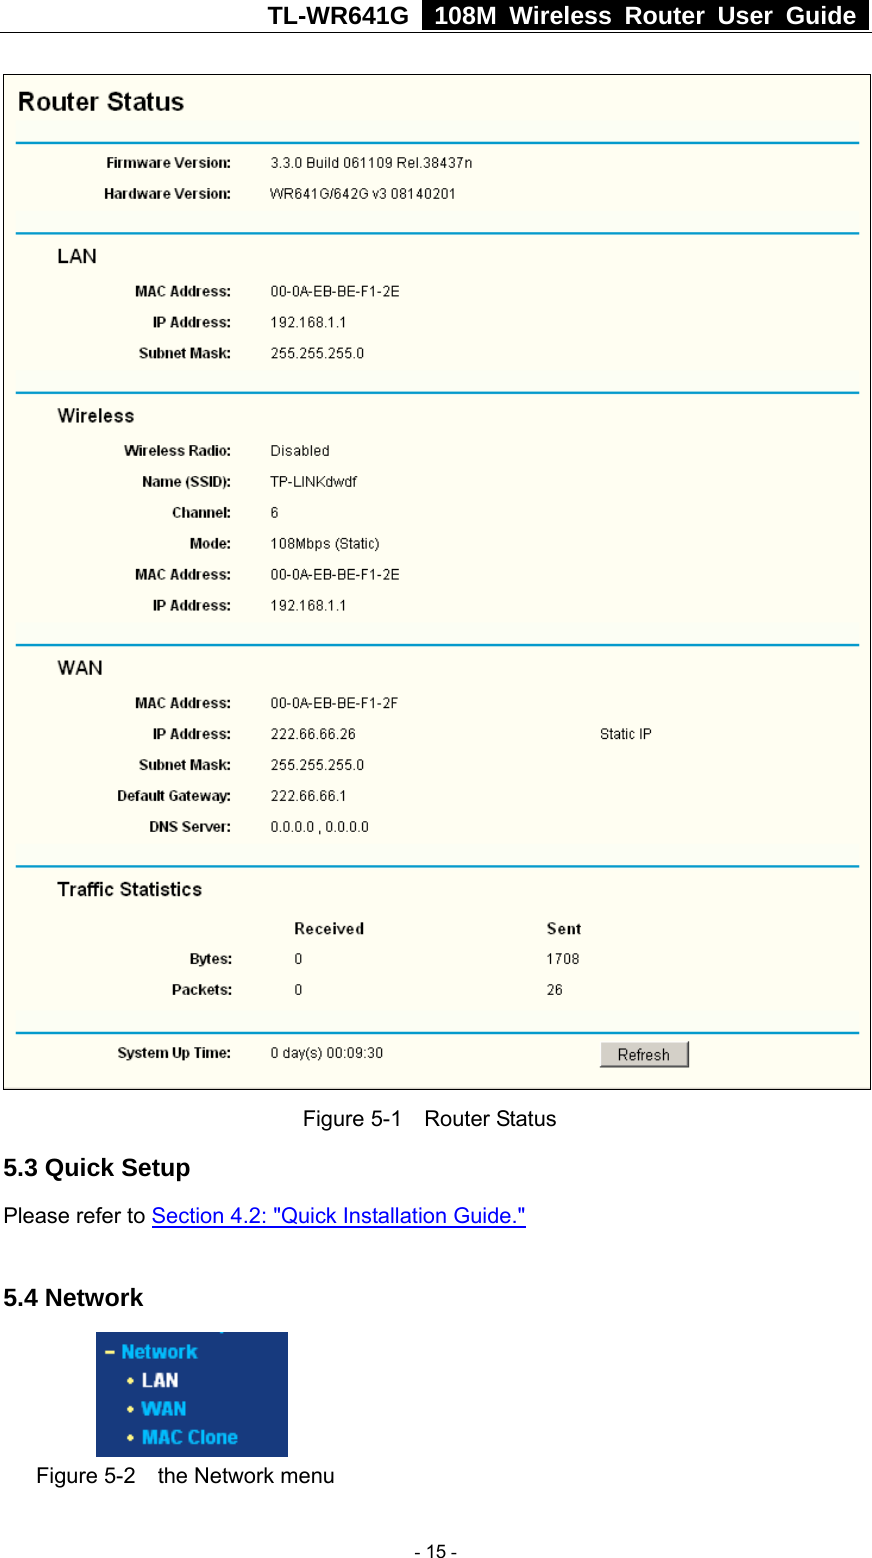 TL-WR641G   108M Wireless Router User Guide   Figure 5-1  Router Status 5.3 Quick Setup Please refer to Section 4.2: &quot;Quick Installation Guide.&quot; 5.4 Network  Figure 5-2    the Network menu  - 15 - 